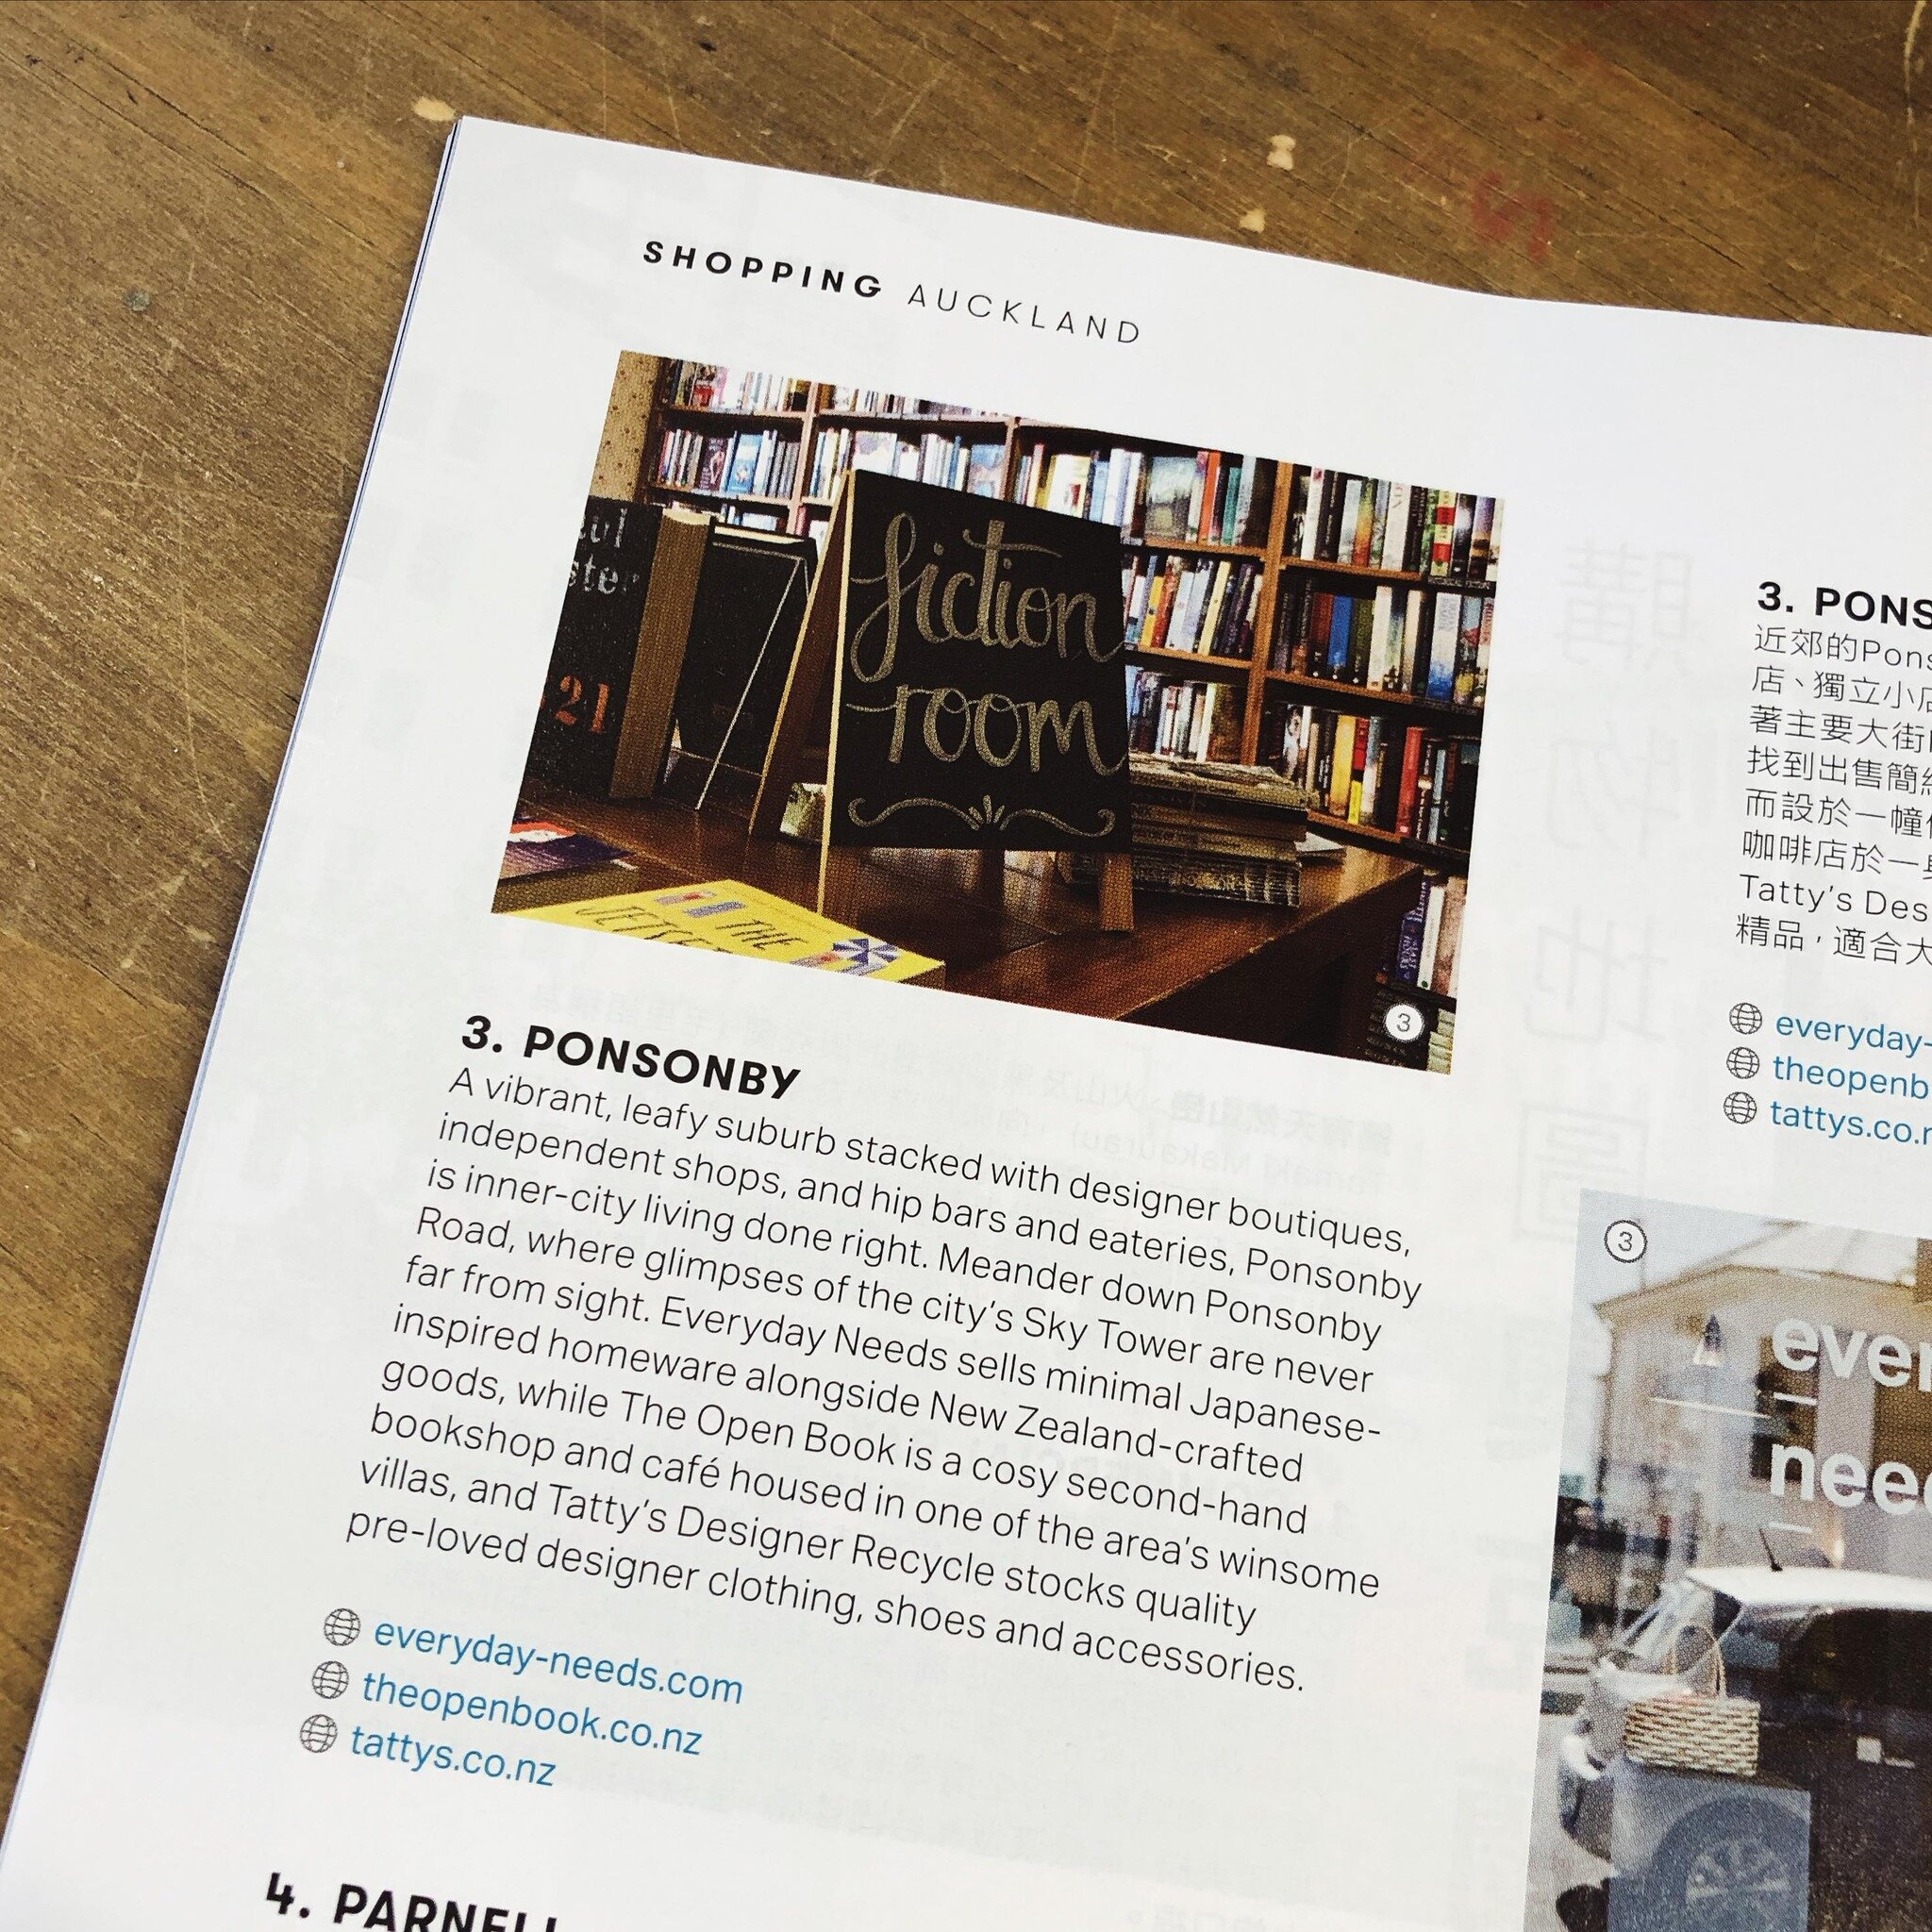 We&rsquo;ve been featured in the March issue of the Cathay in-flight magazine alongside our wonderful neighbours @everydayneeds and @tattys_designer_recycle ✨ thanks so much for spotlighting us @cathaypacific! ✈️